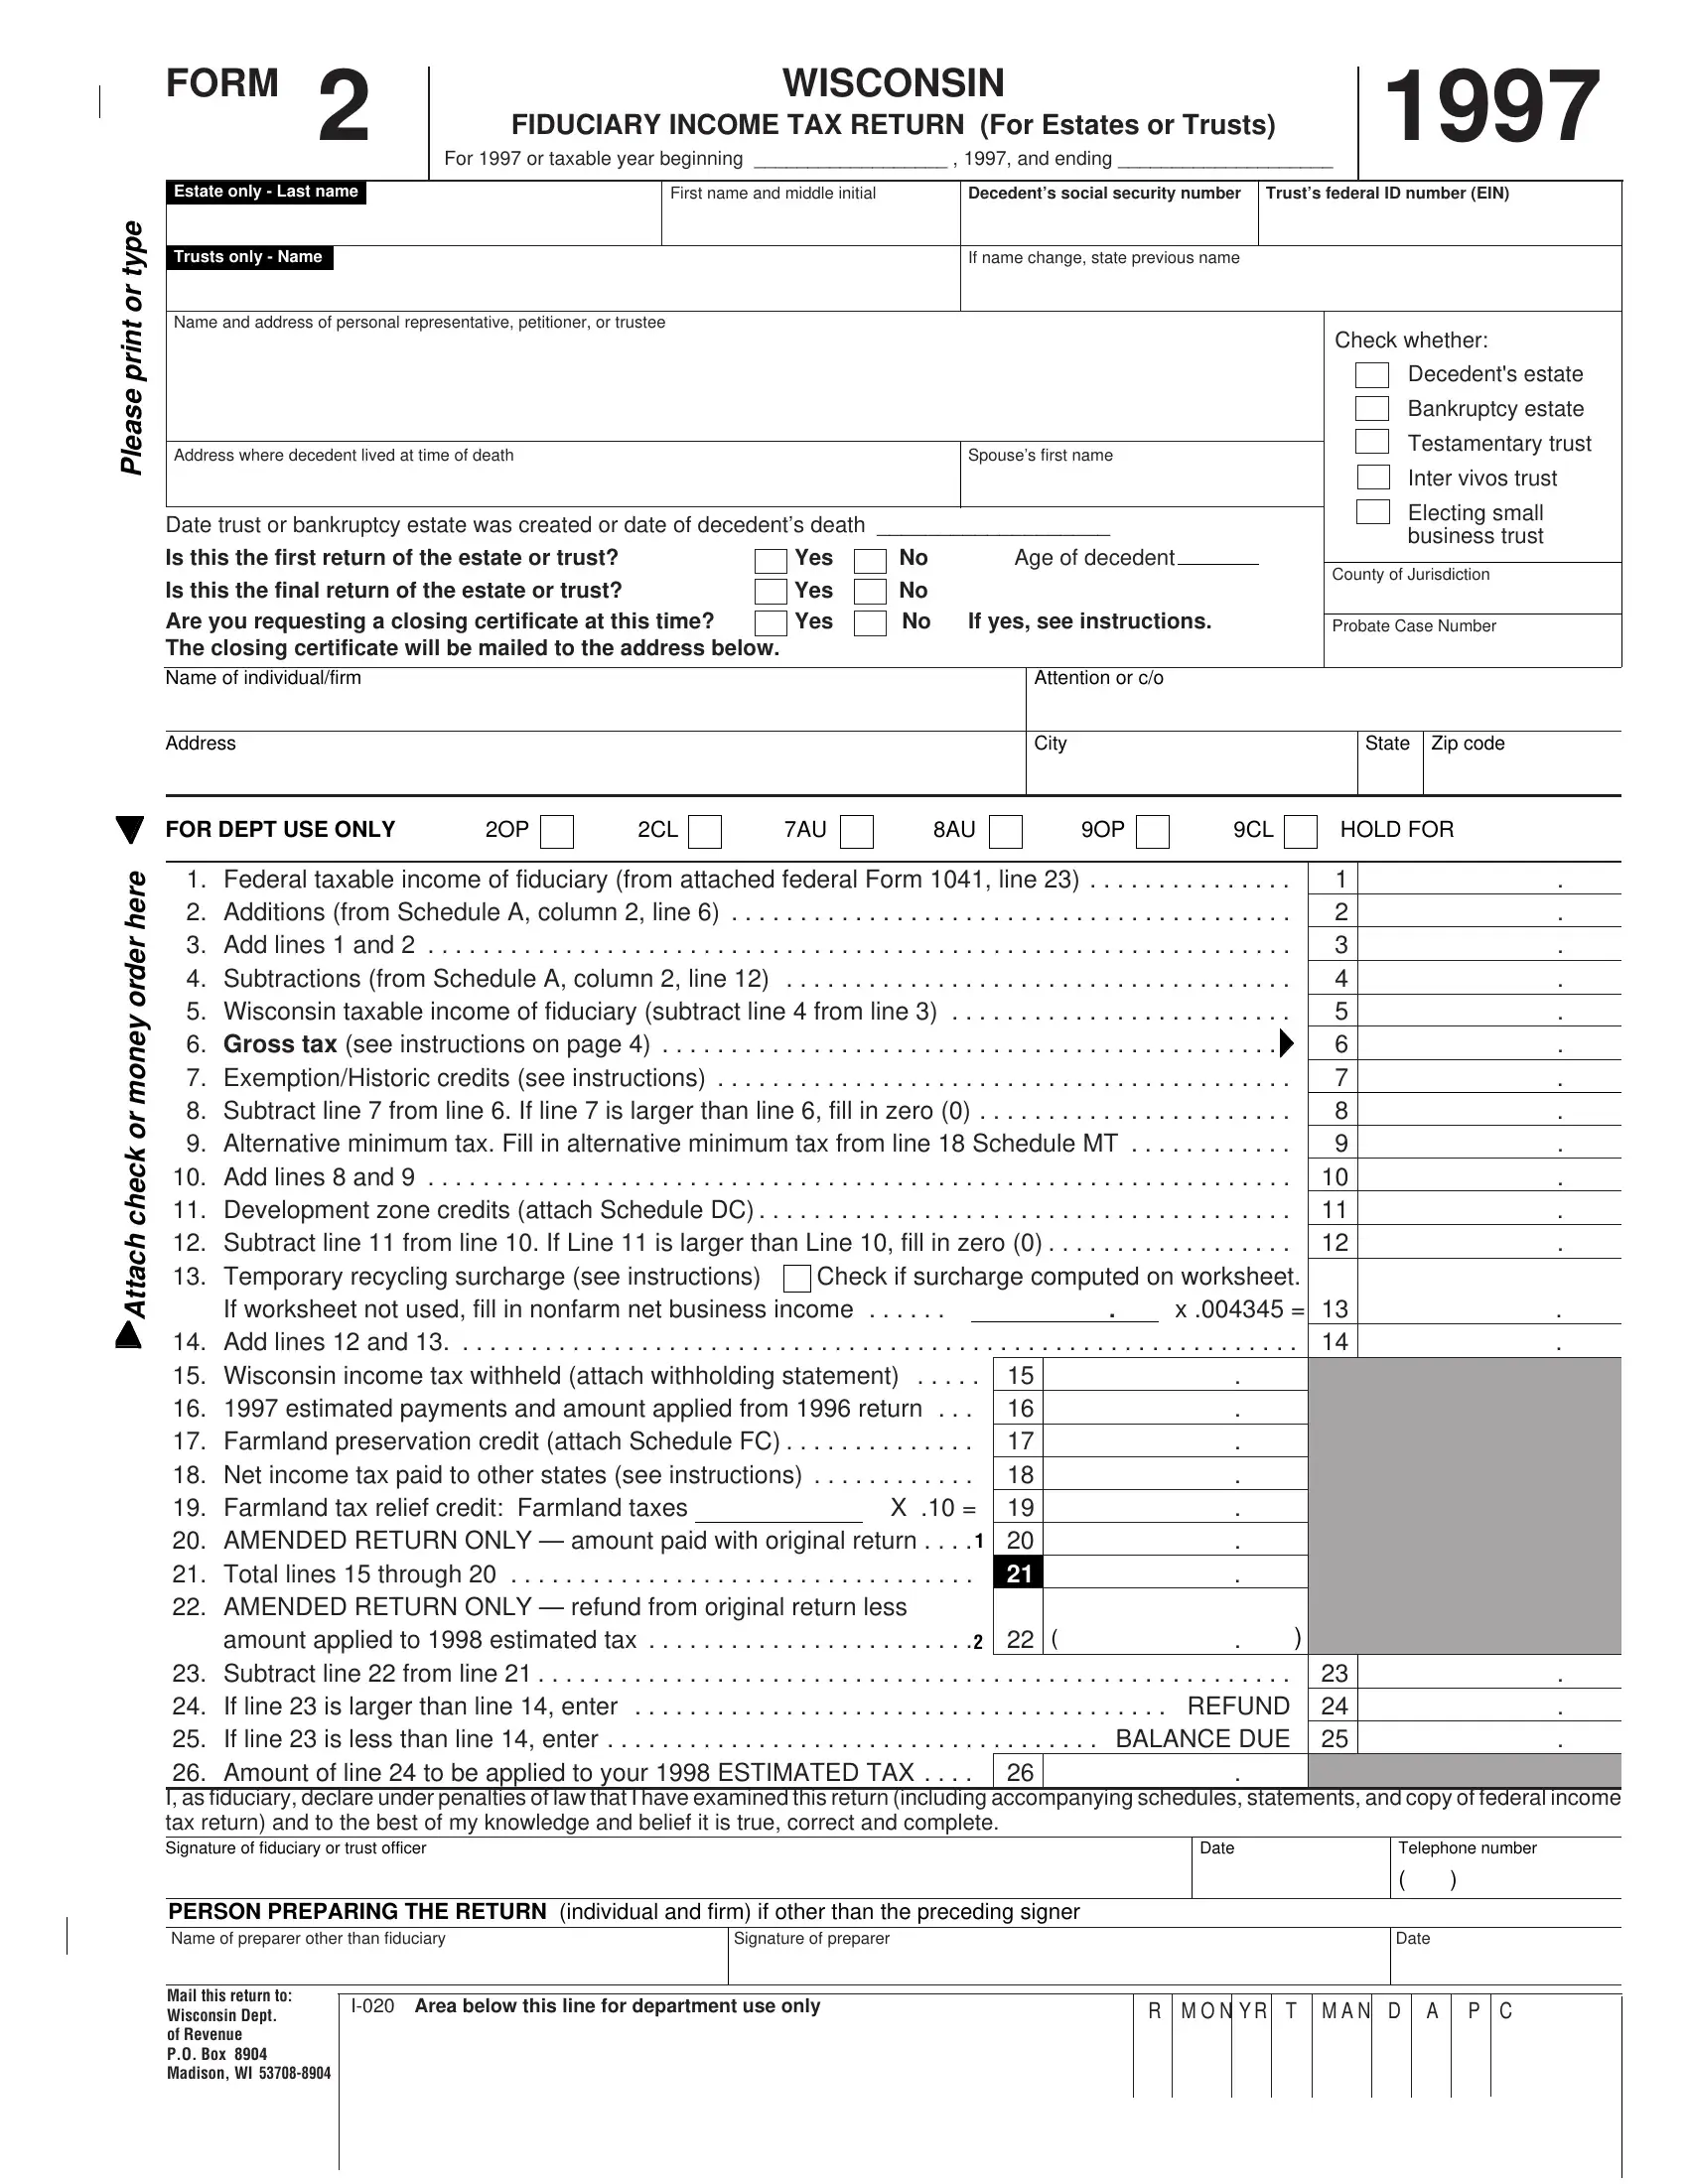 Wisconsin Form 2 Preview